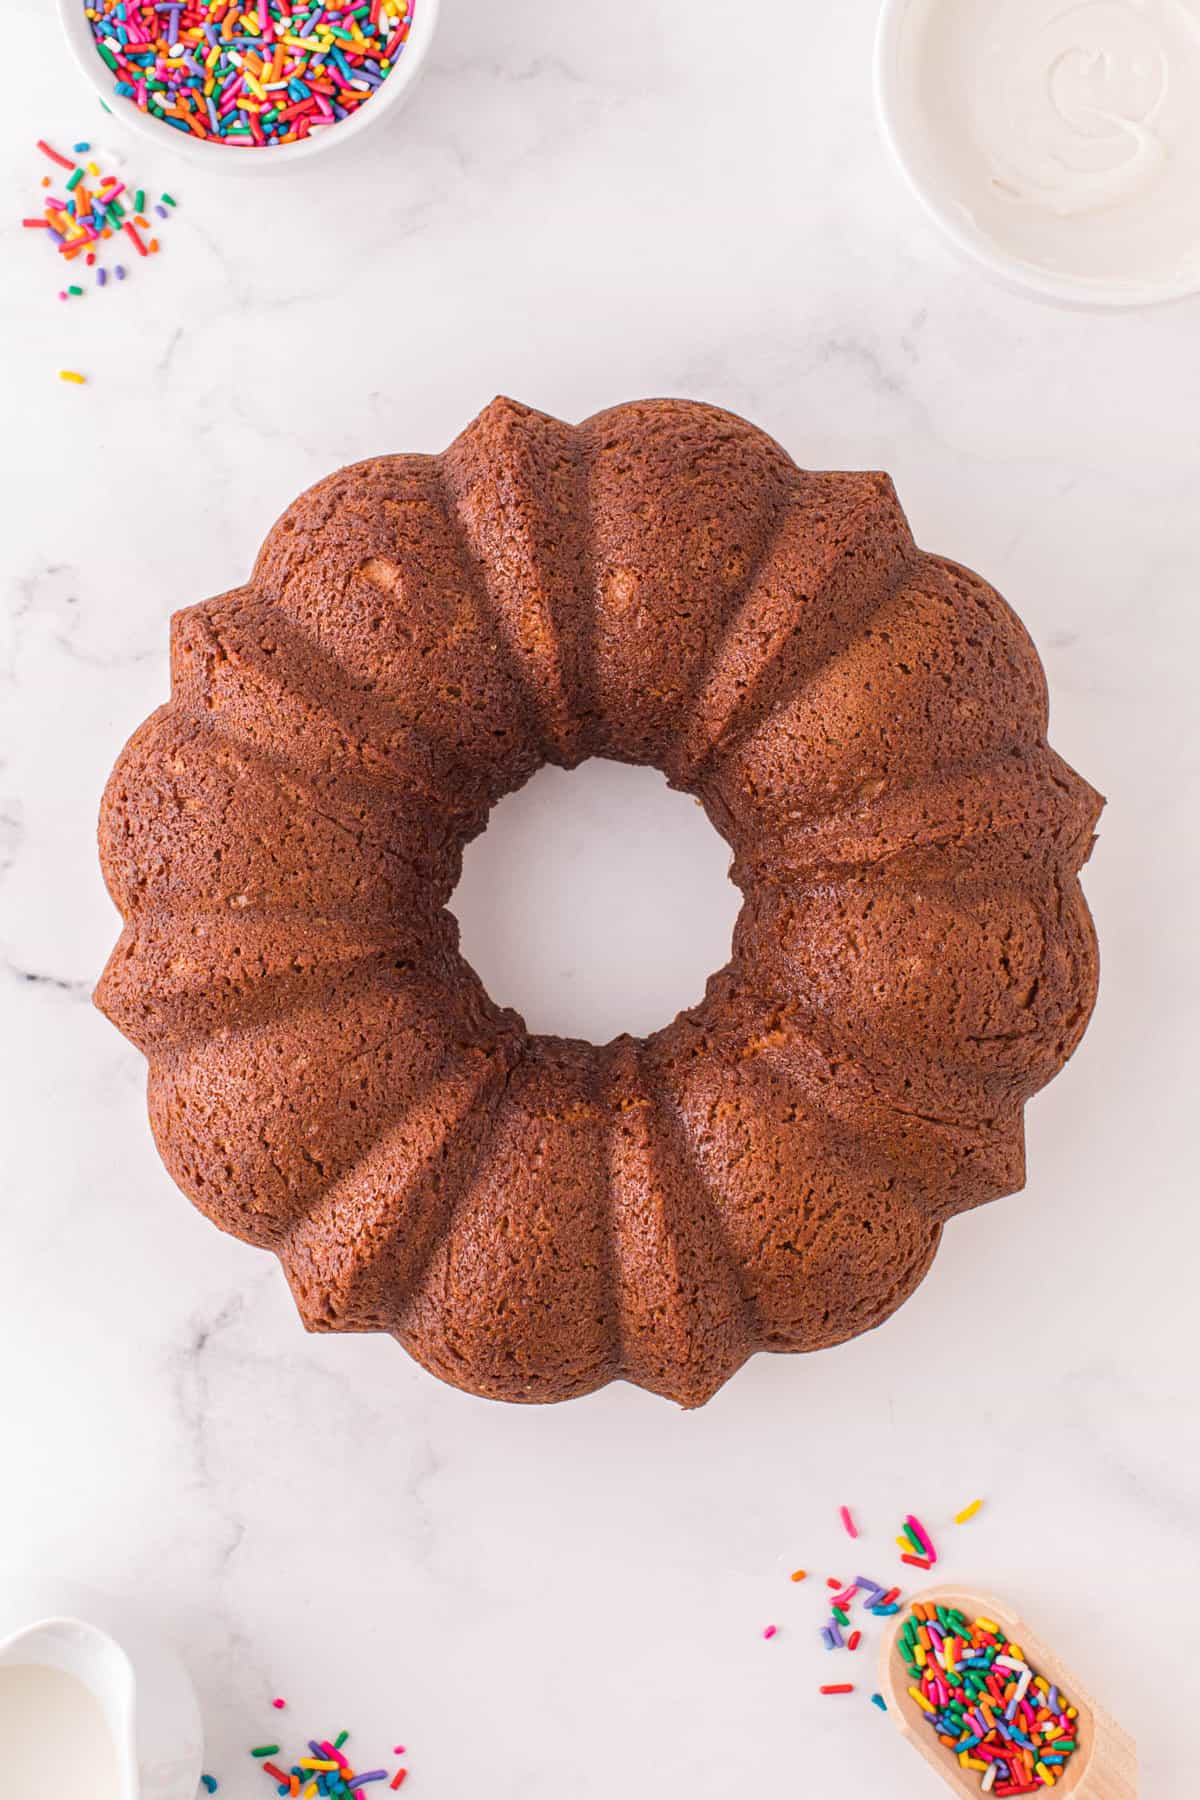 Bundt cake completely cooked and cooled.